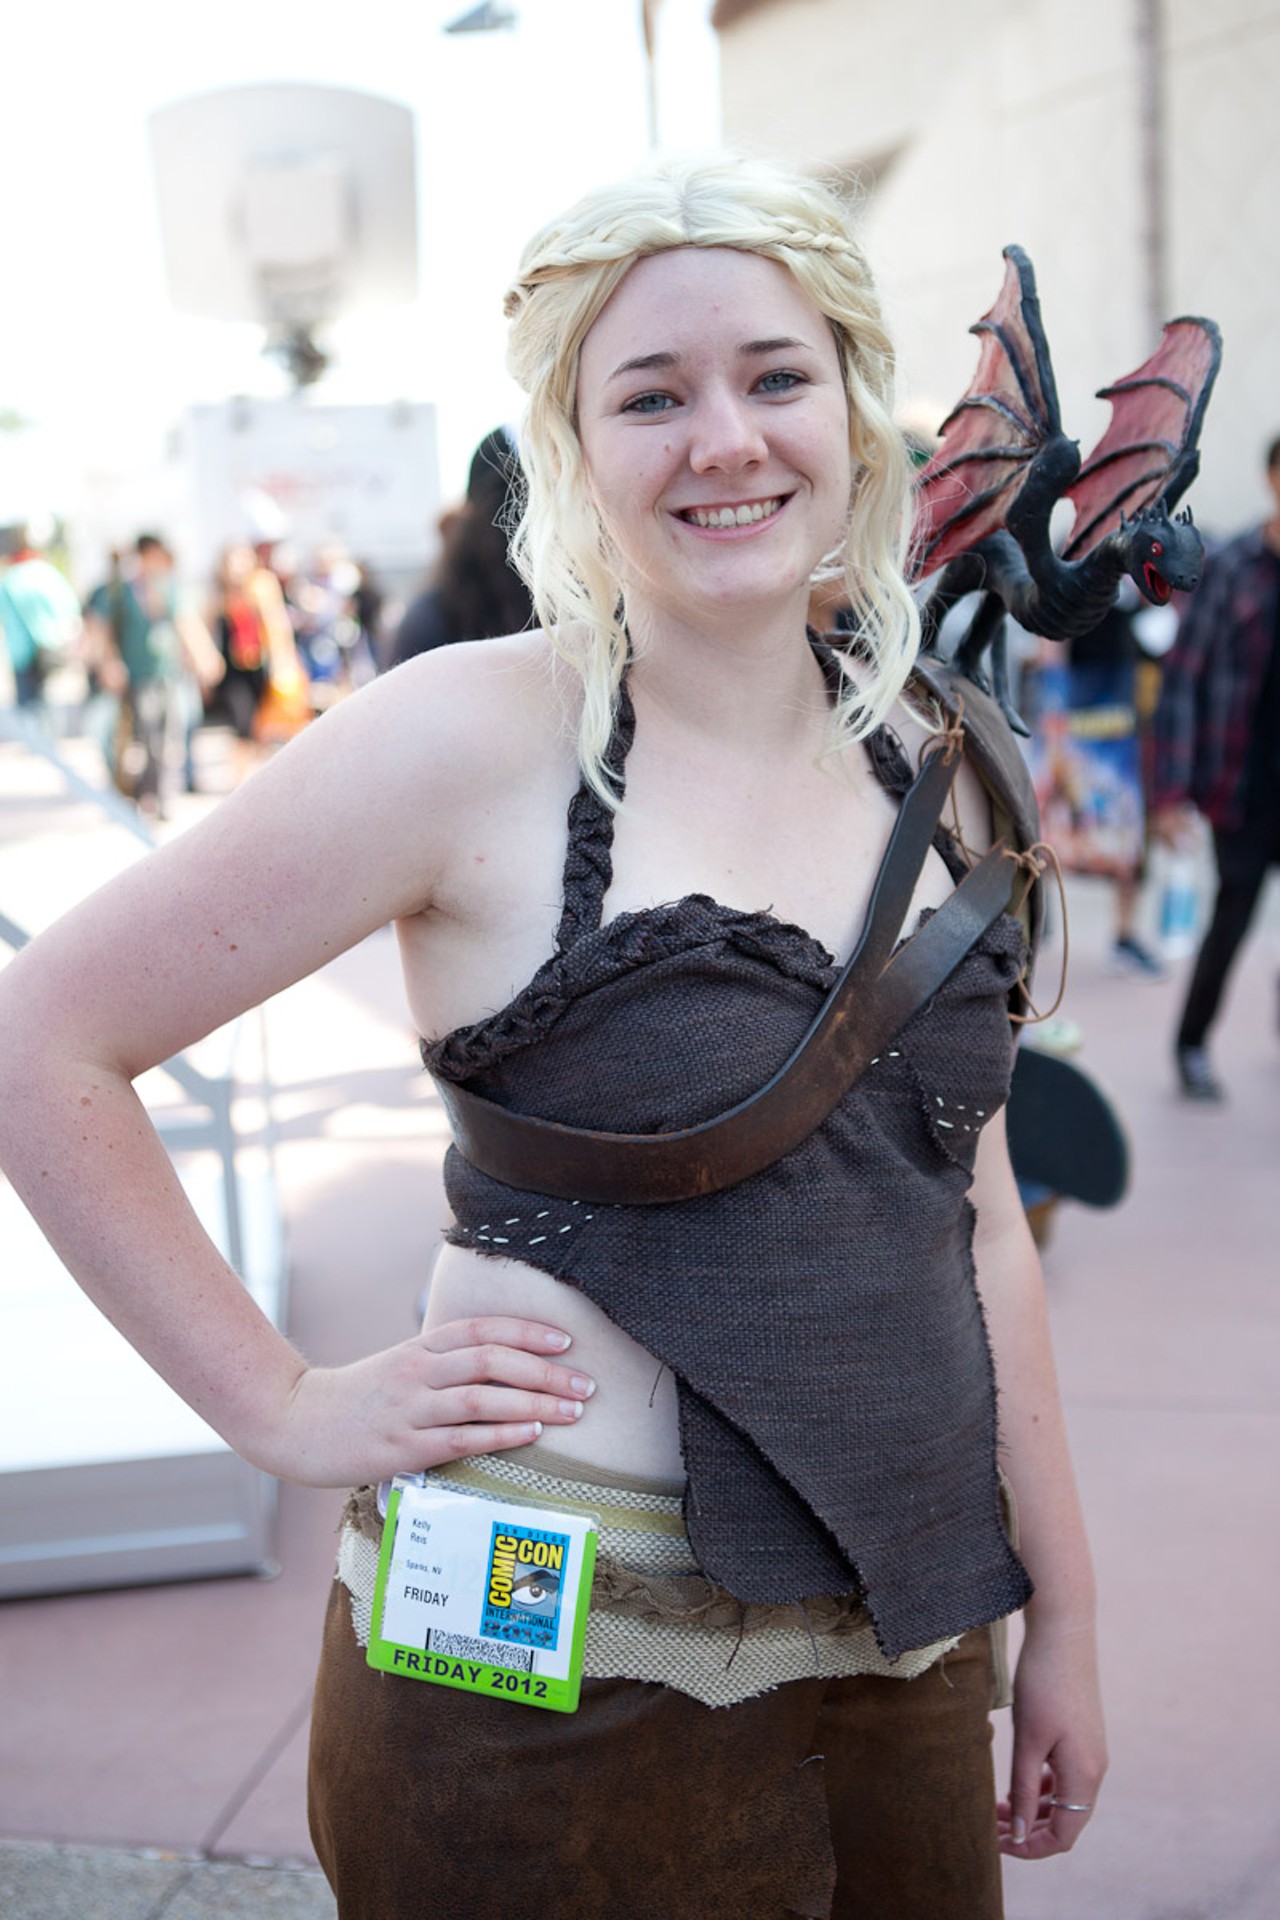 Cosplay on Display at Comic-Con 2012